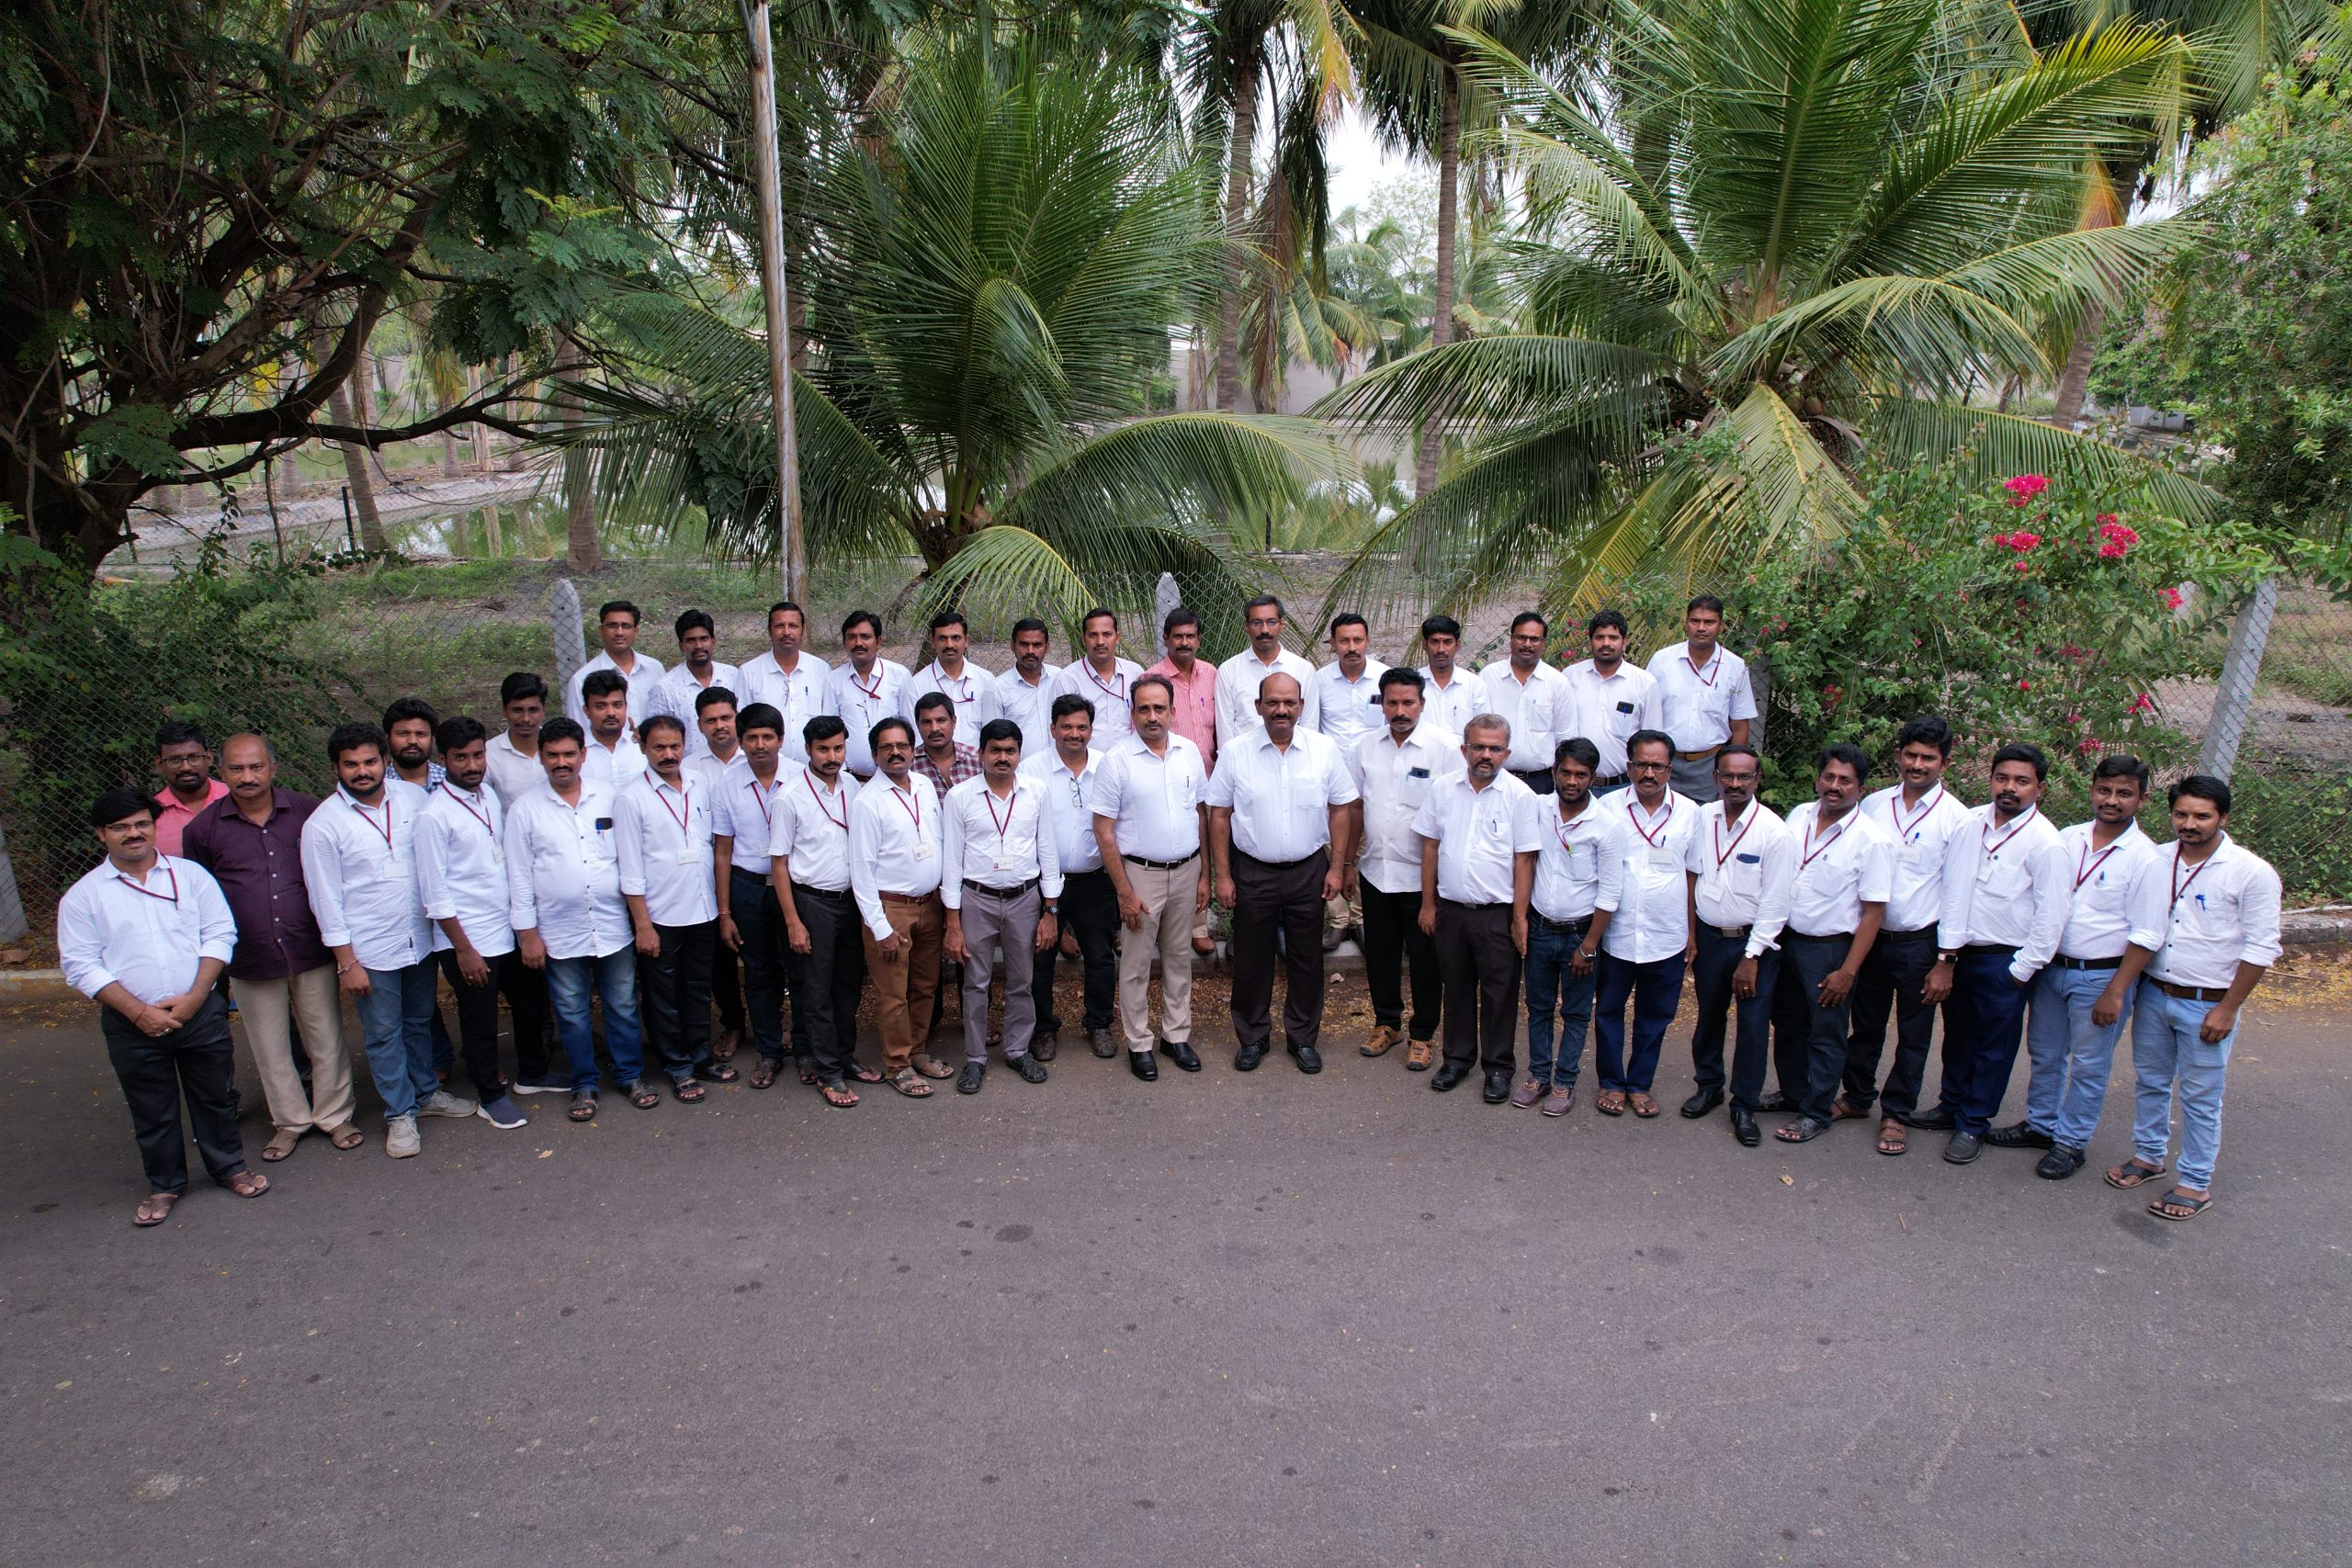 02.Staff group Photo by drone